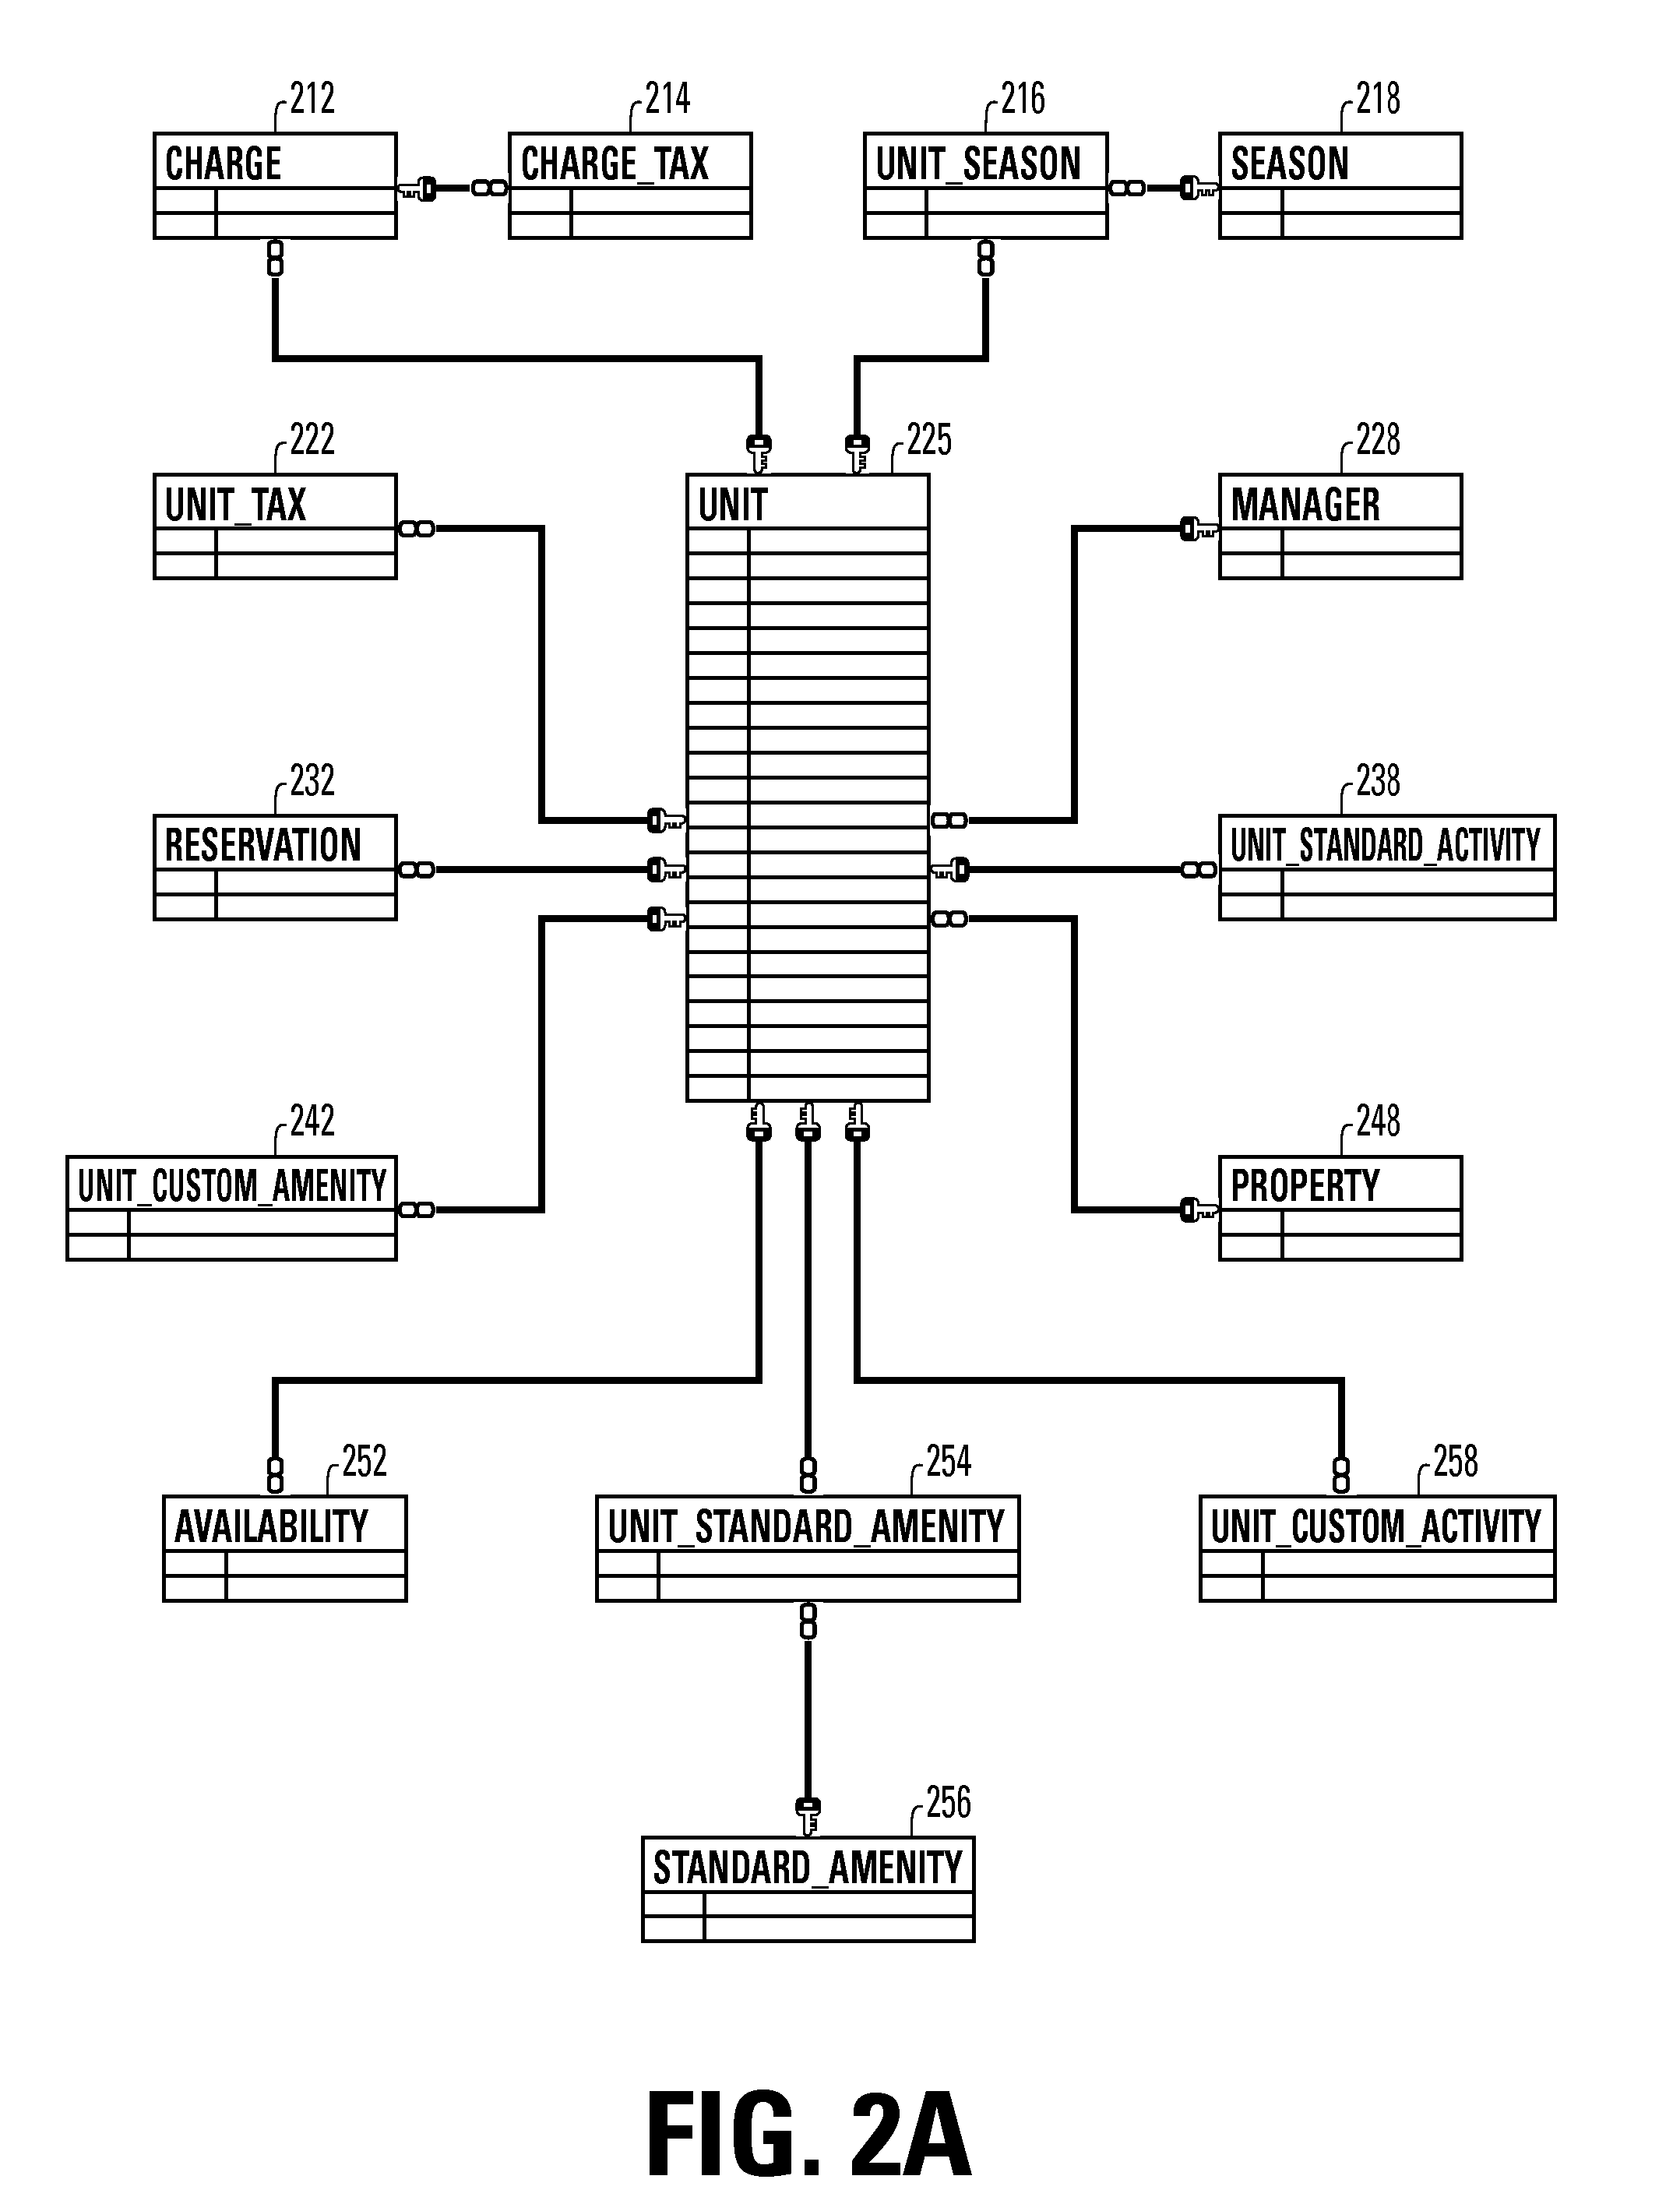 Software Architecture and Database for Integrated Travel Itinerary and Related Reservation System Components